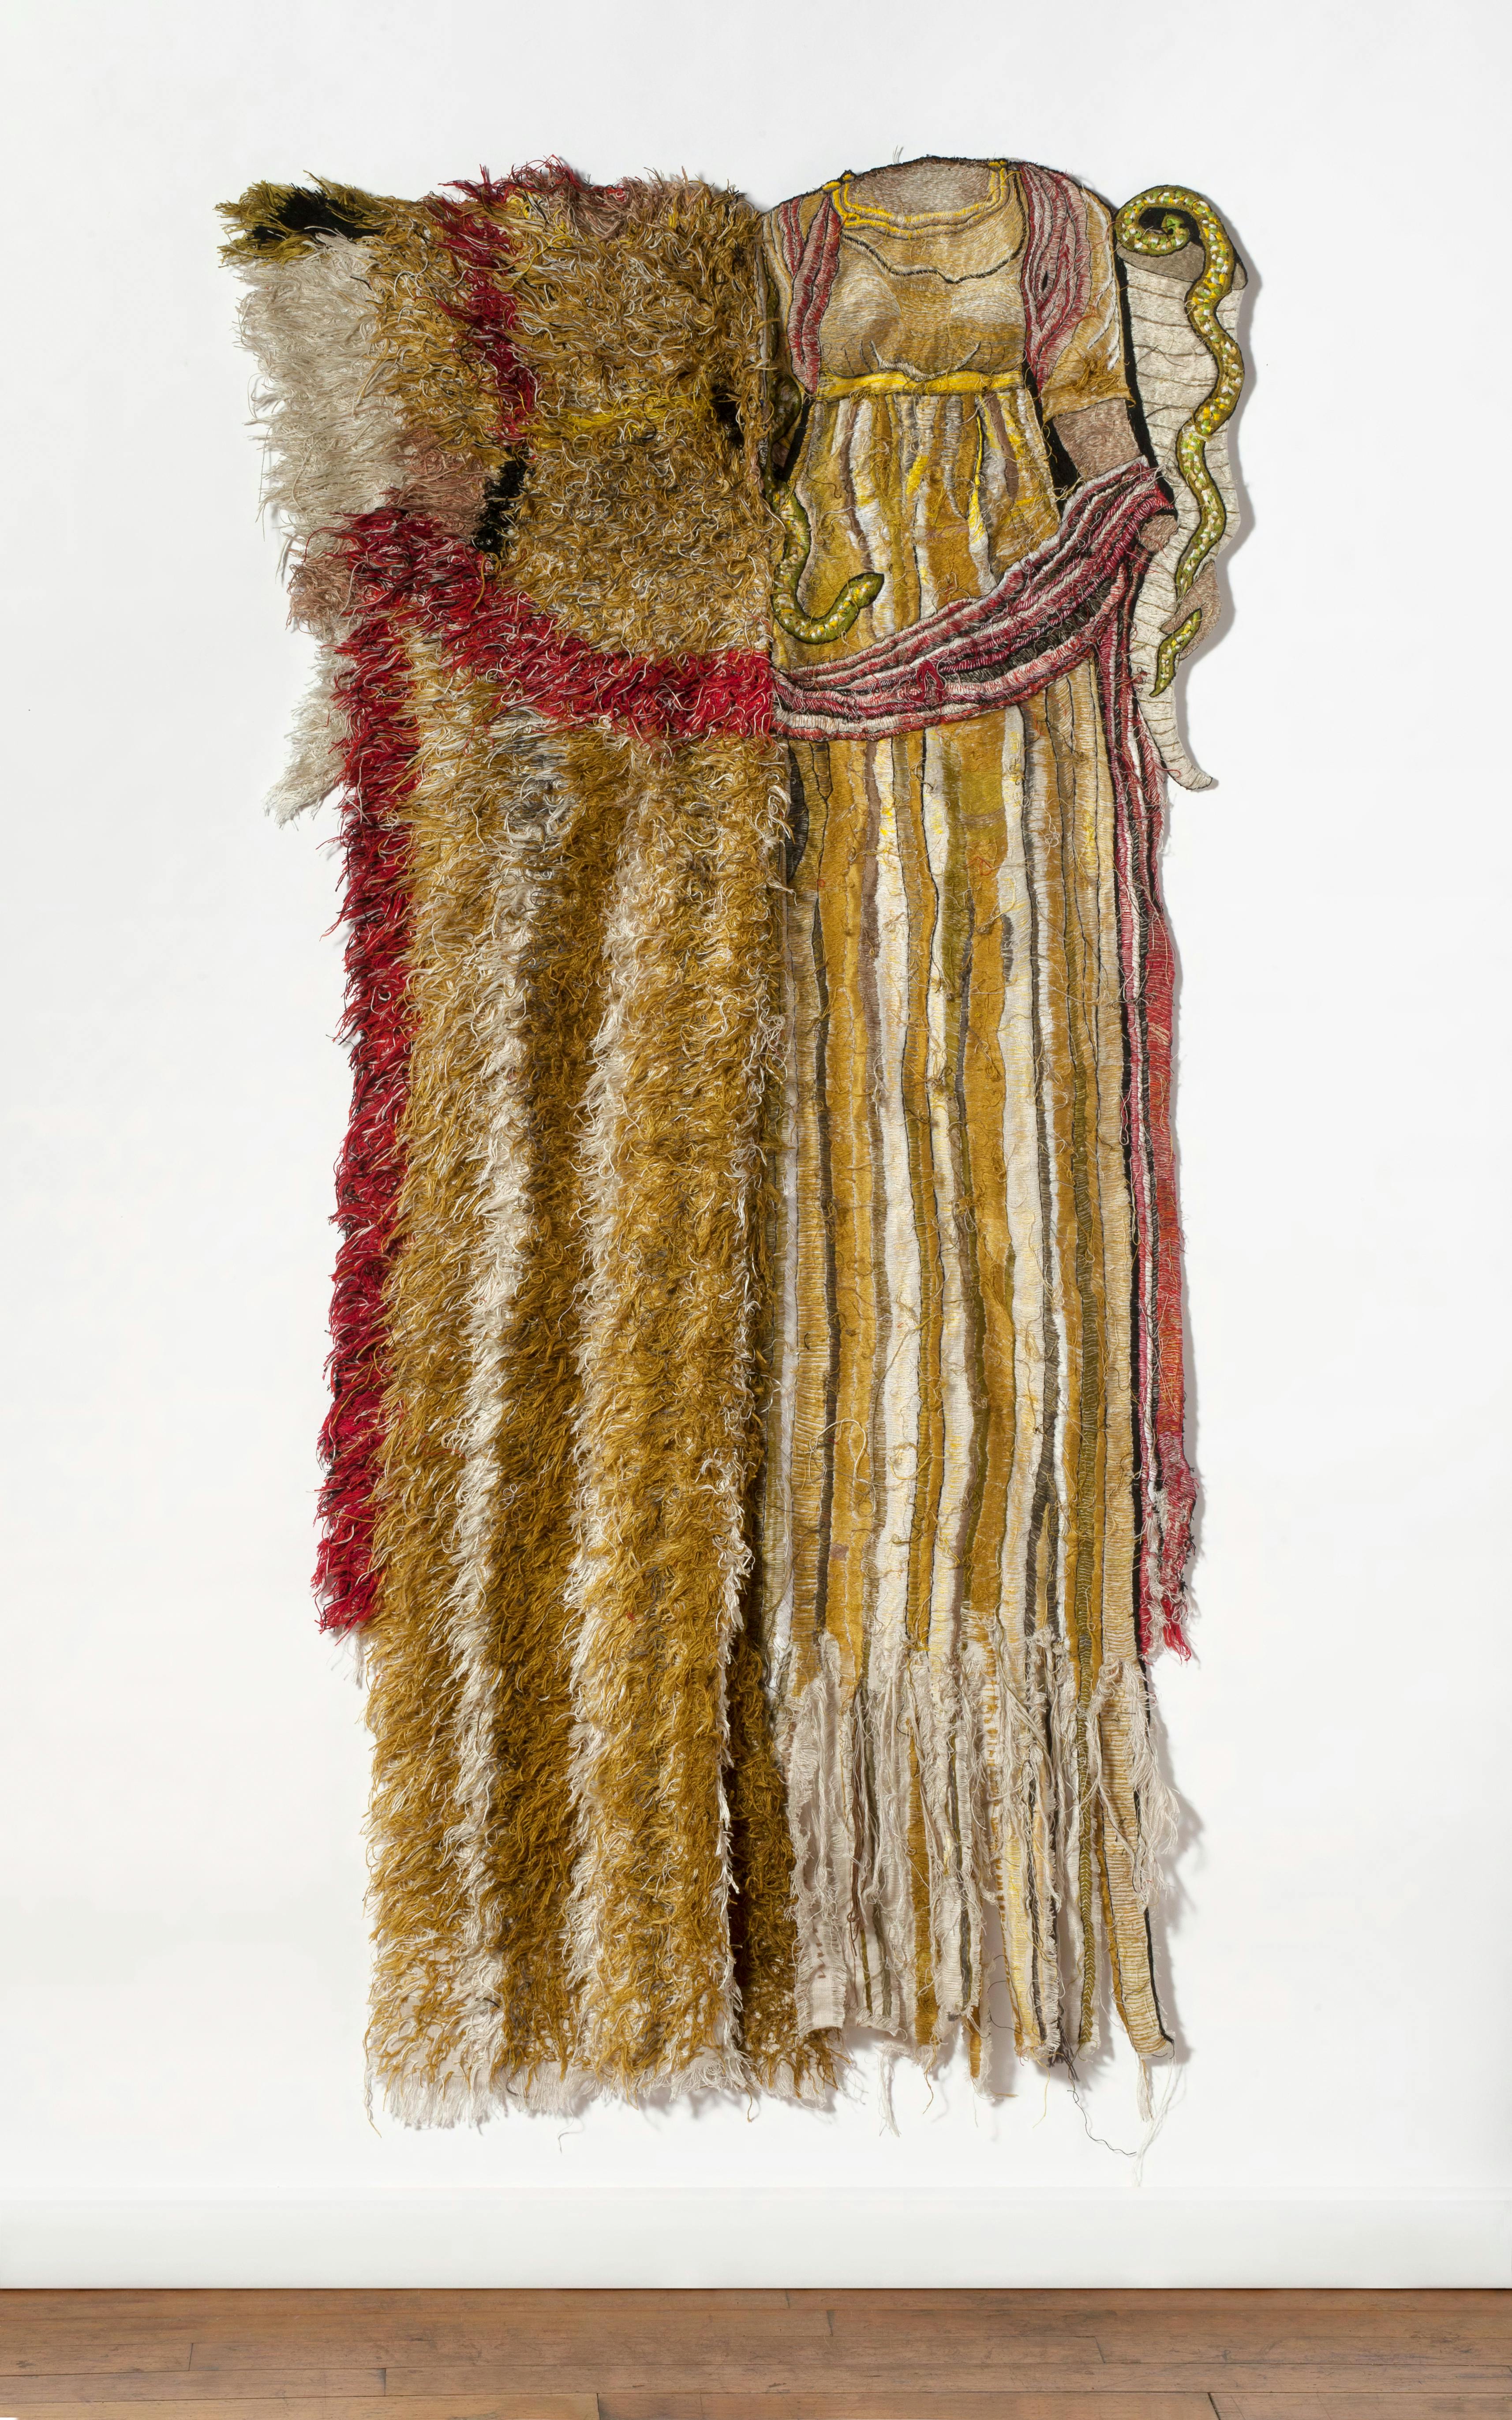 textile sculpture that appears to be part rug and part Grecian dress